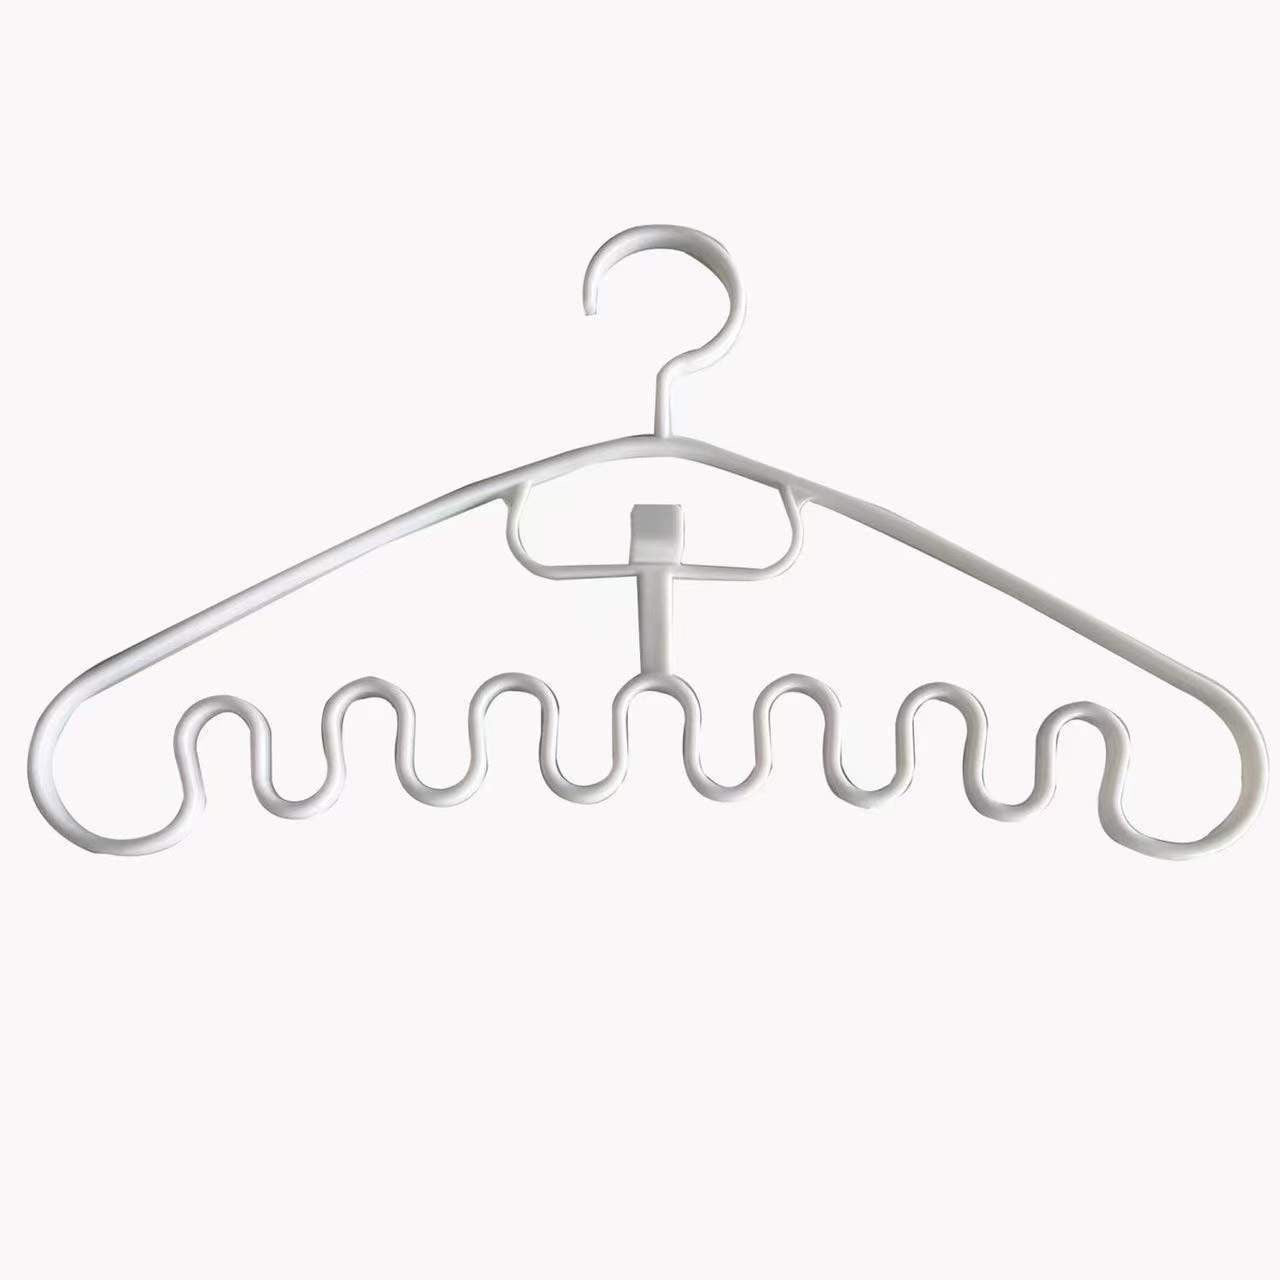 A  Wave Pattern Stackable Hanger Clothes